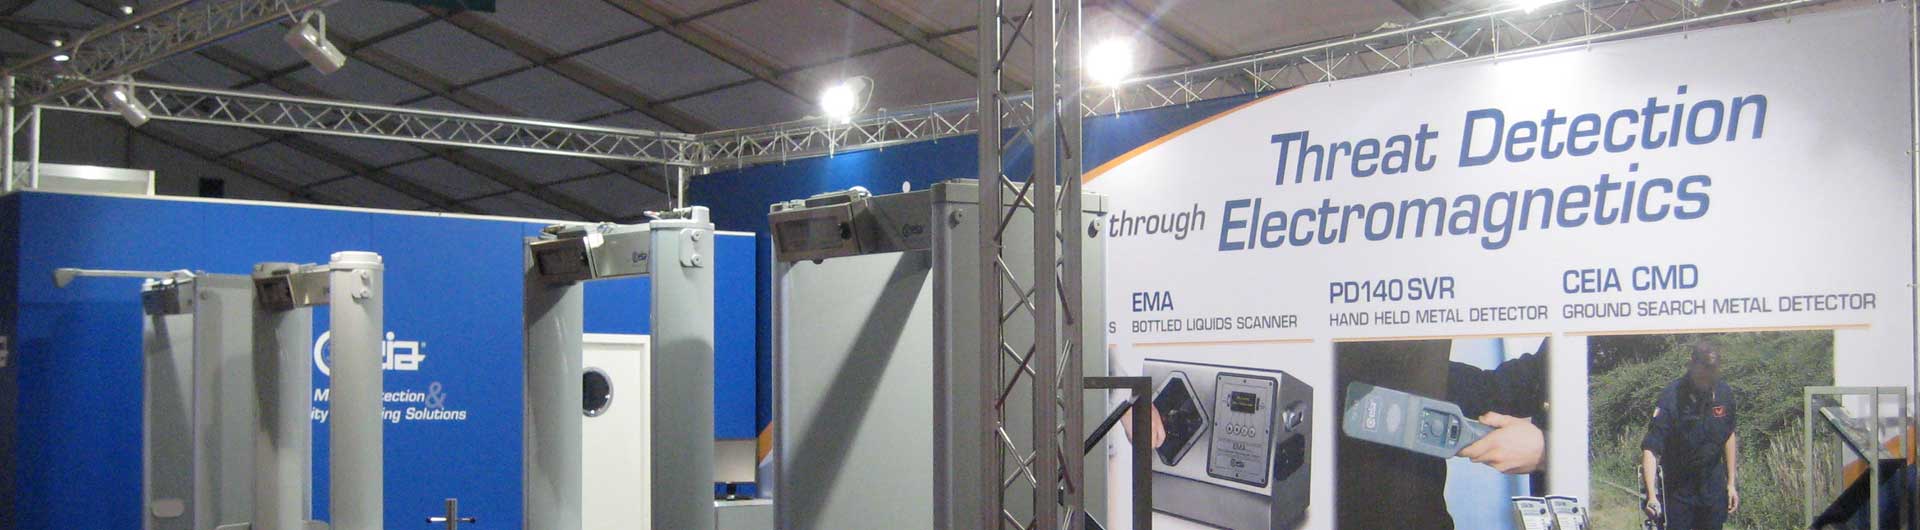 CEIA Exhibition Stand
 Image